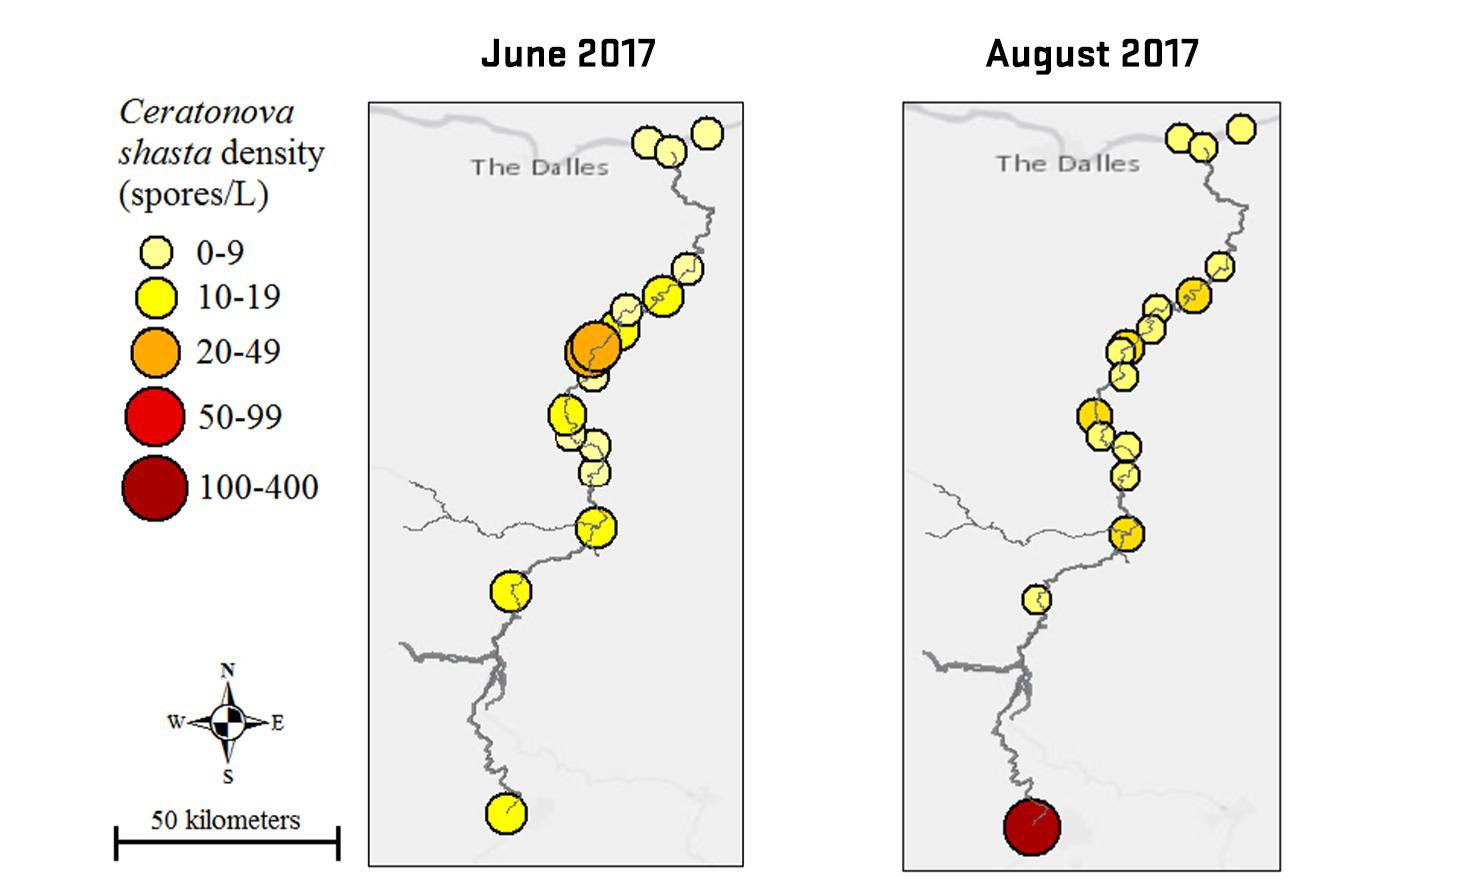 Two side-by-side maps of the Deschutes River labeled with Ceratonova shasta density (spores/L) by sample sites in red, orange and yellow. Comparing results from June and August 2017.